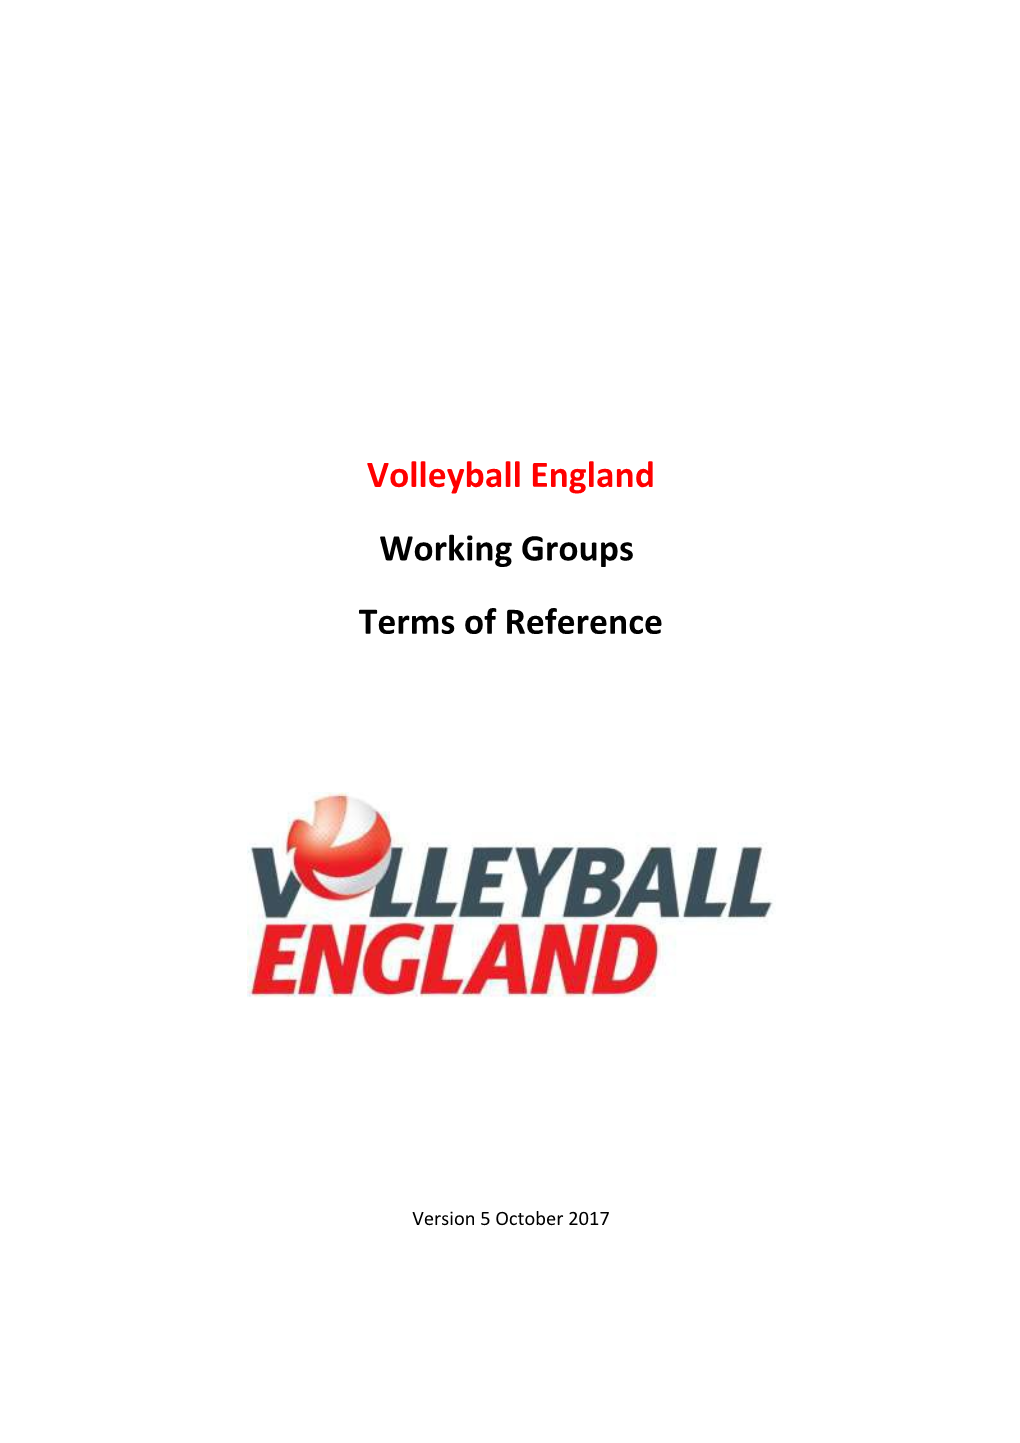 Volleyball England s1